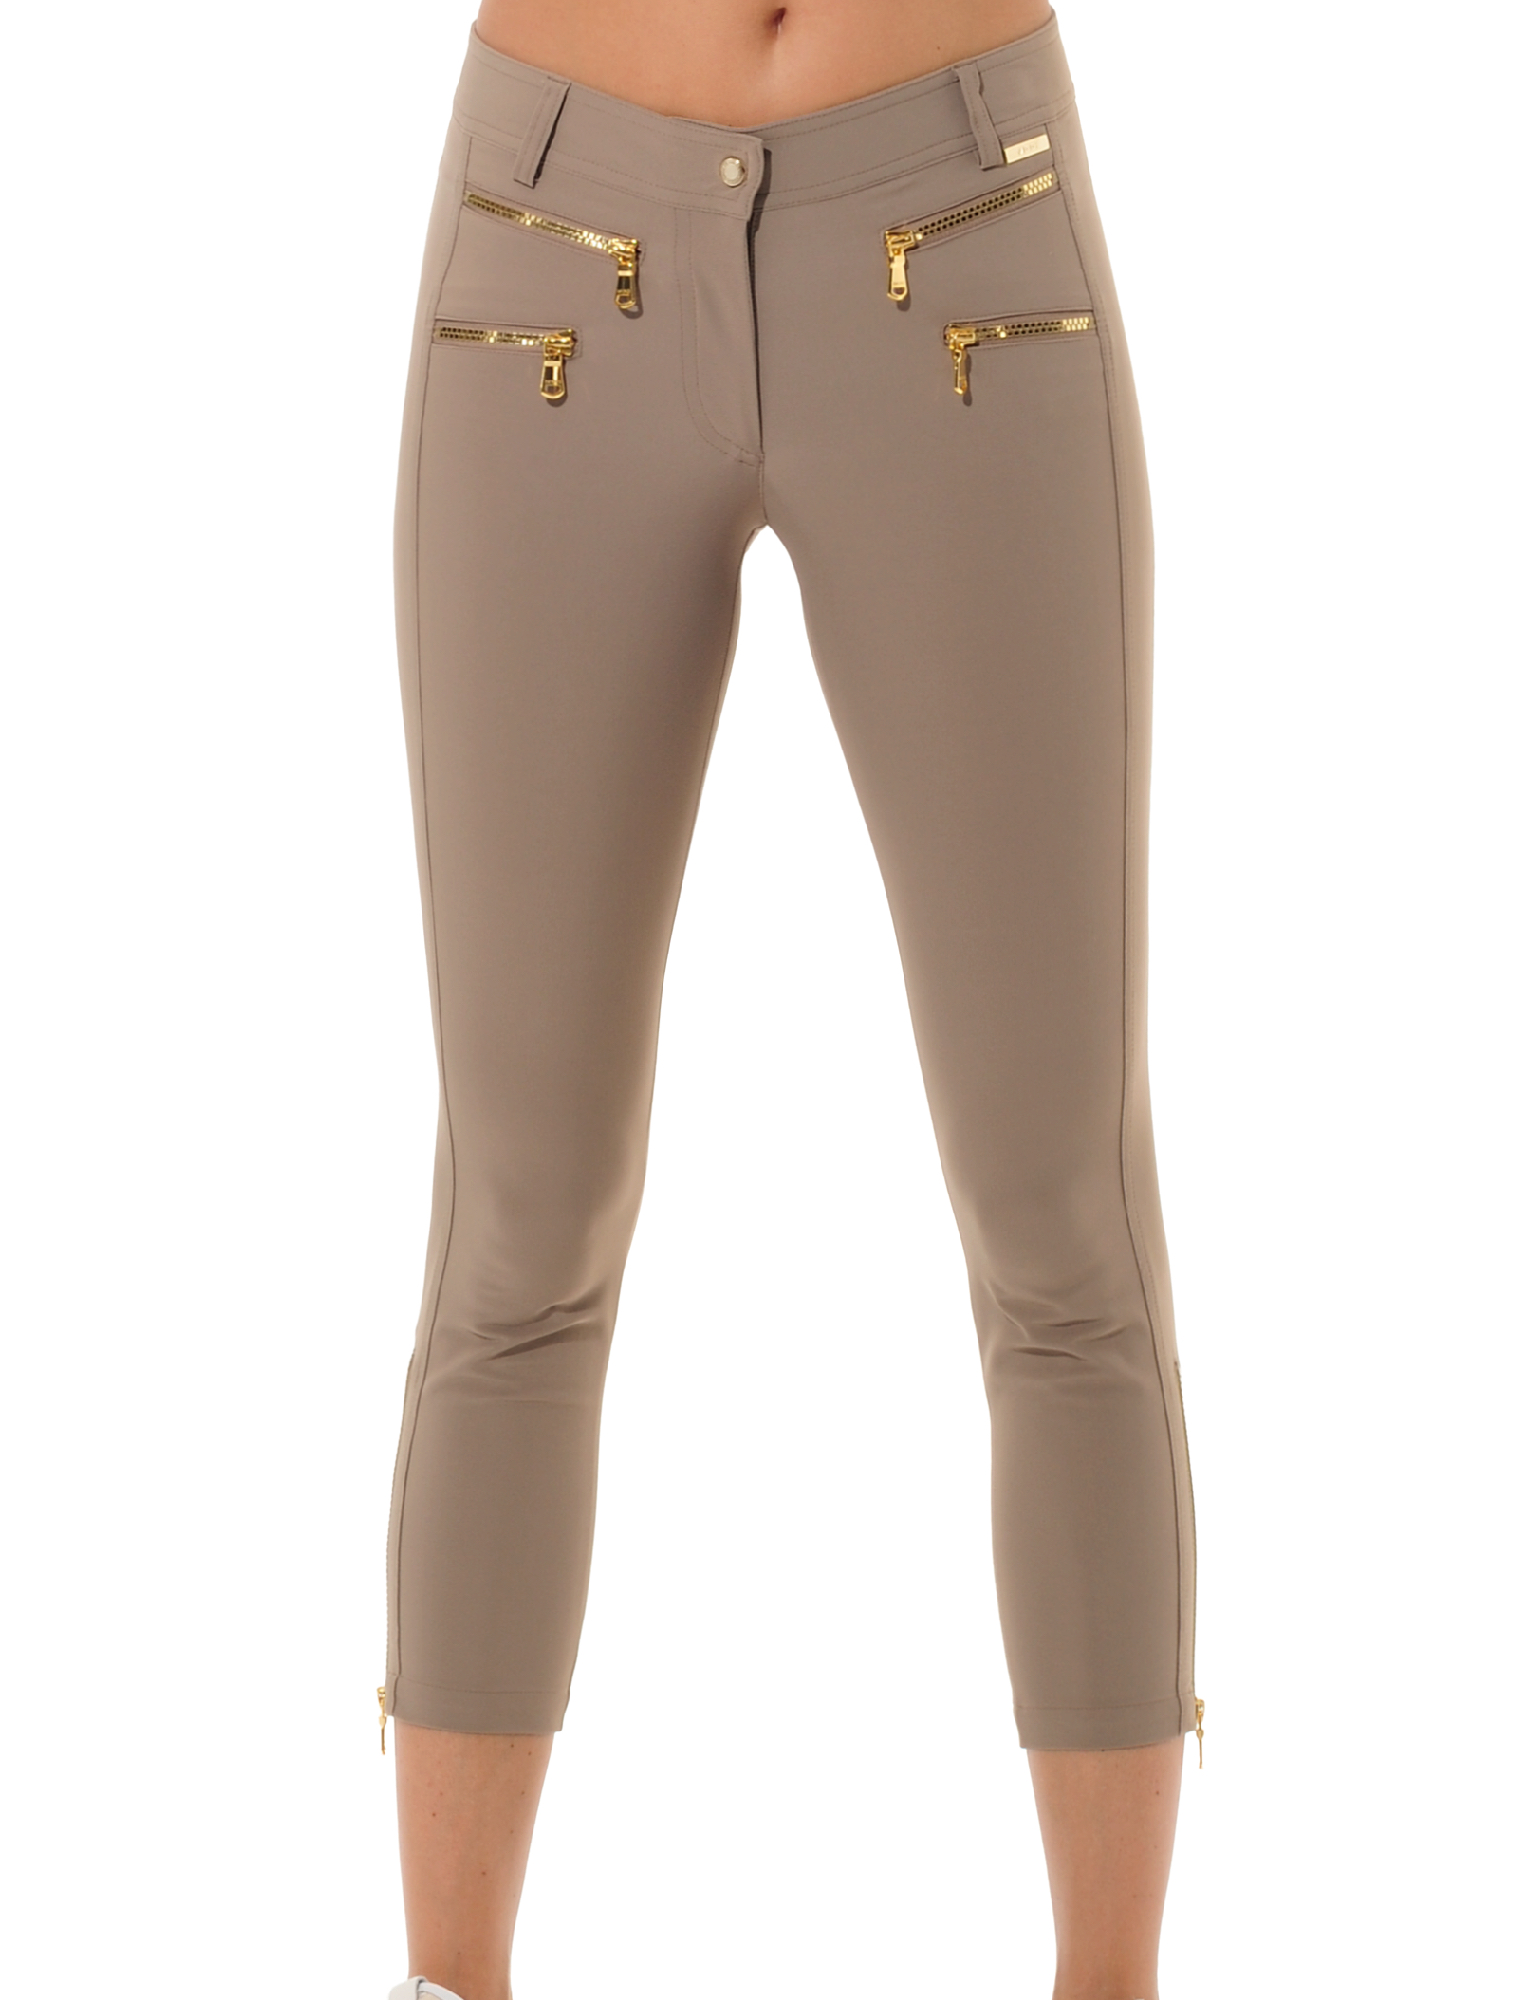 4way stretch shiny gold cube double zip cropped pants toffee 